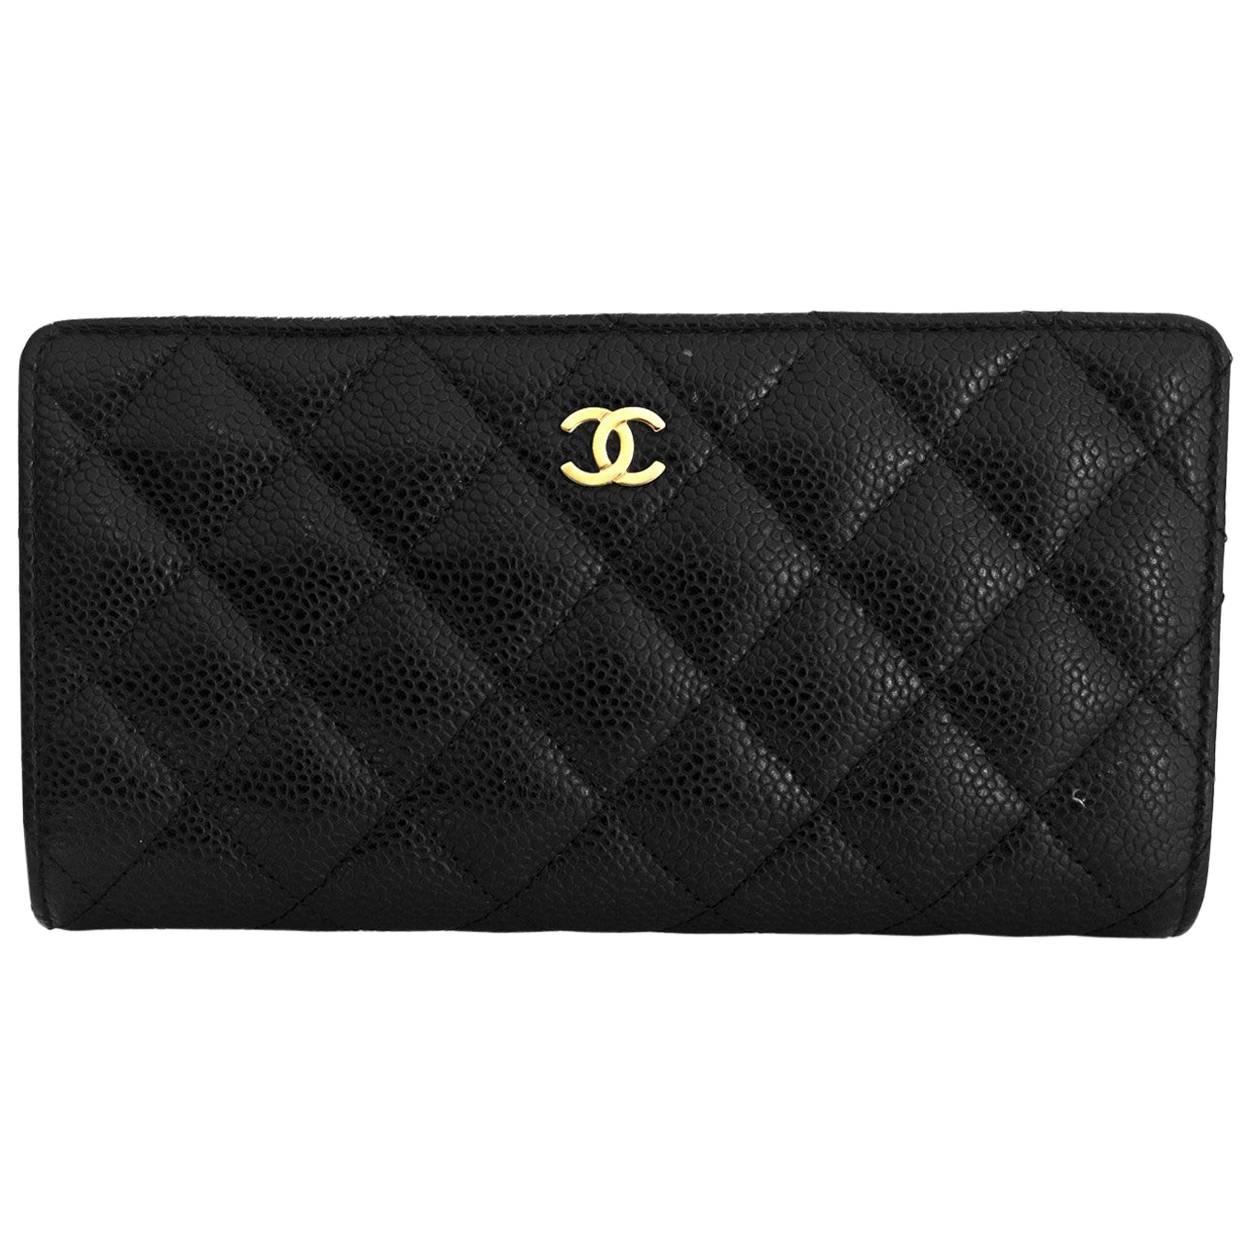 Chanel Black Quilted Caviar Leather Yen Bi-Fold Wallet 